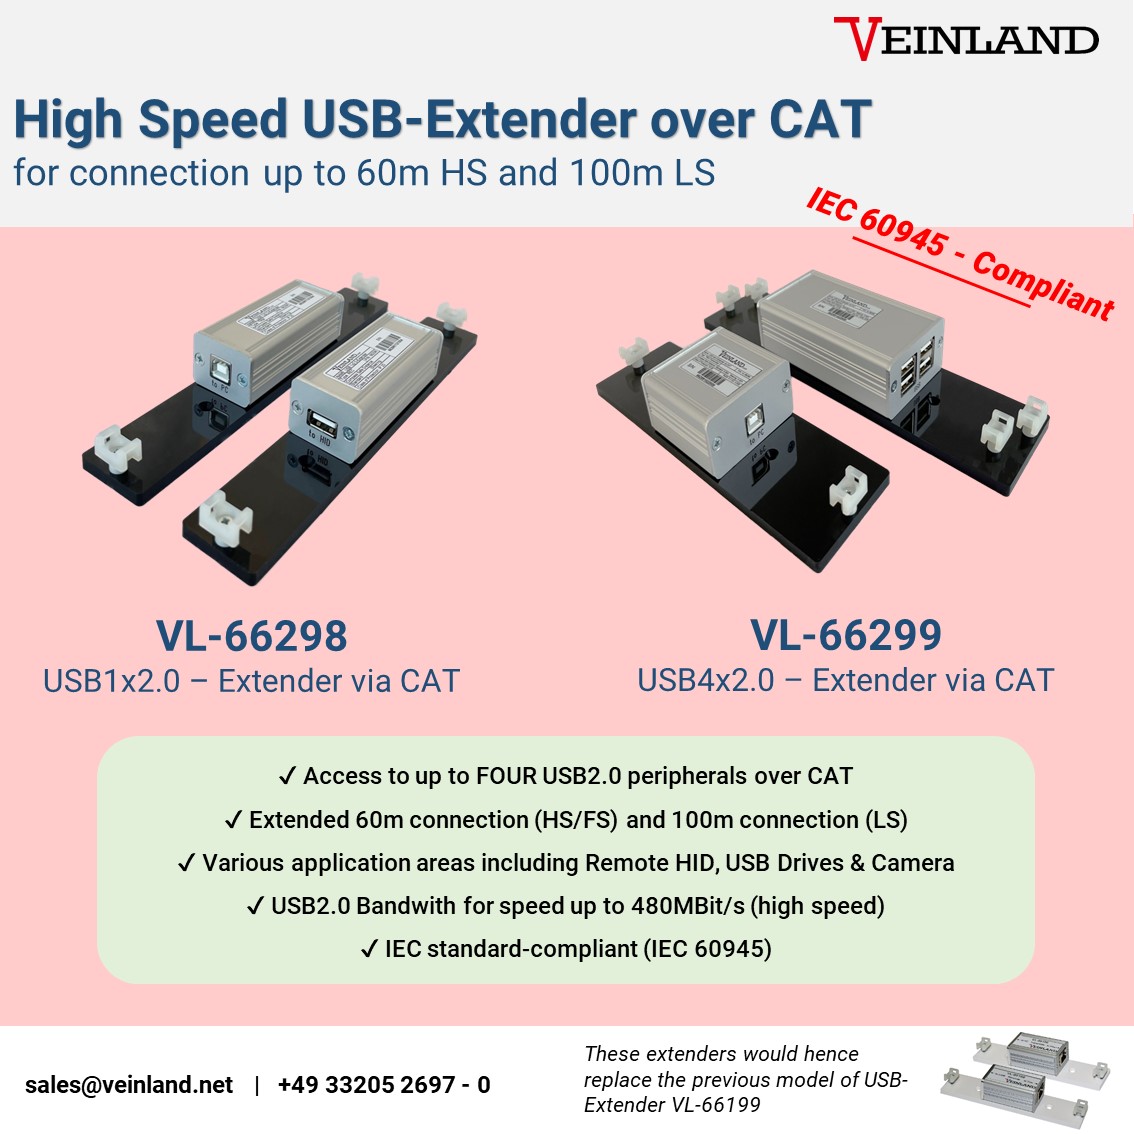 NEW PRODUCT LAUNCH – USB Extender over CAT